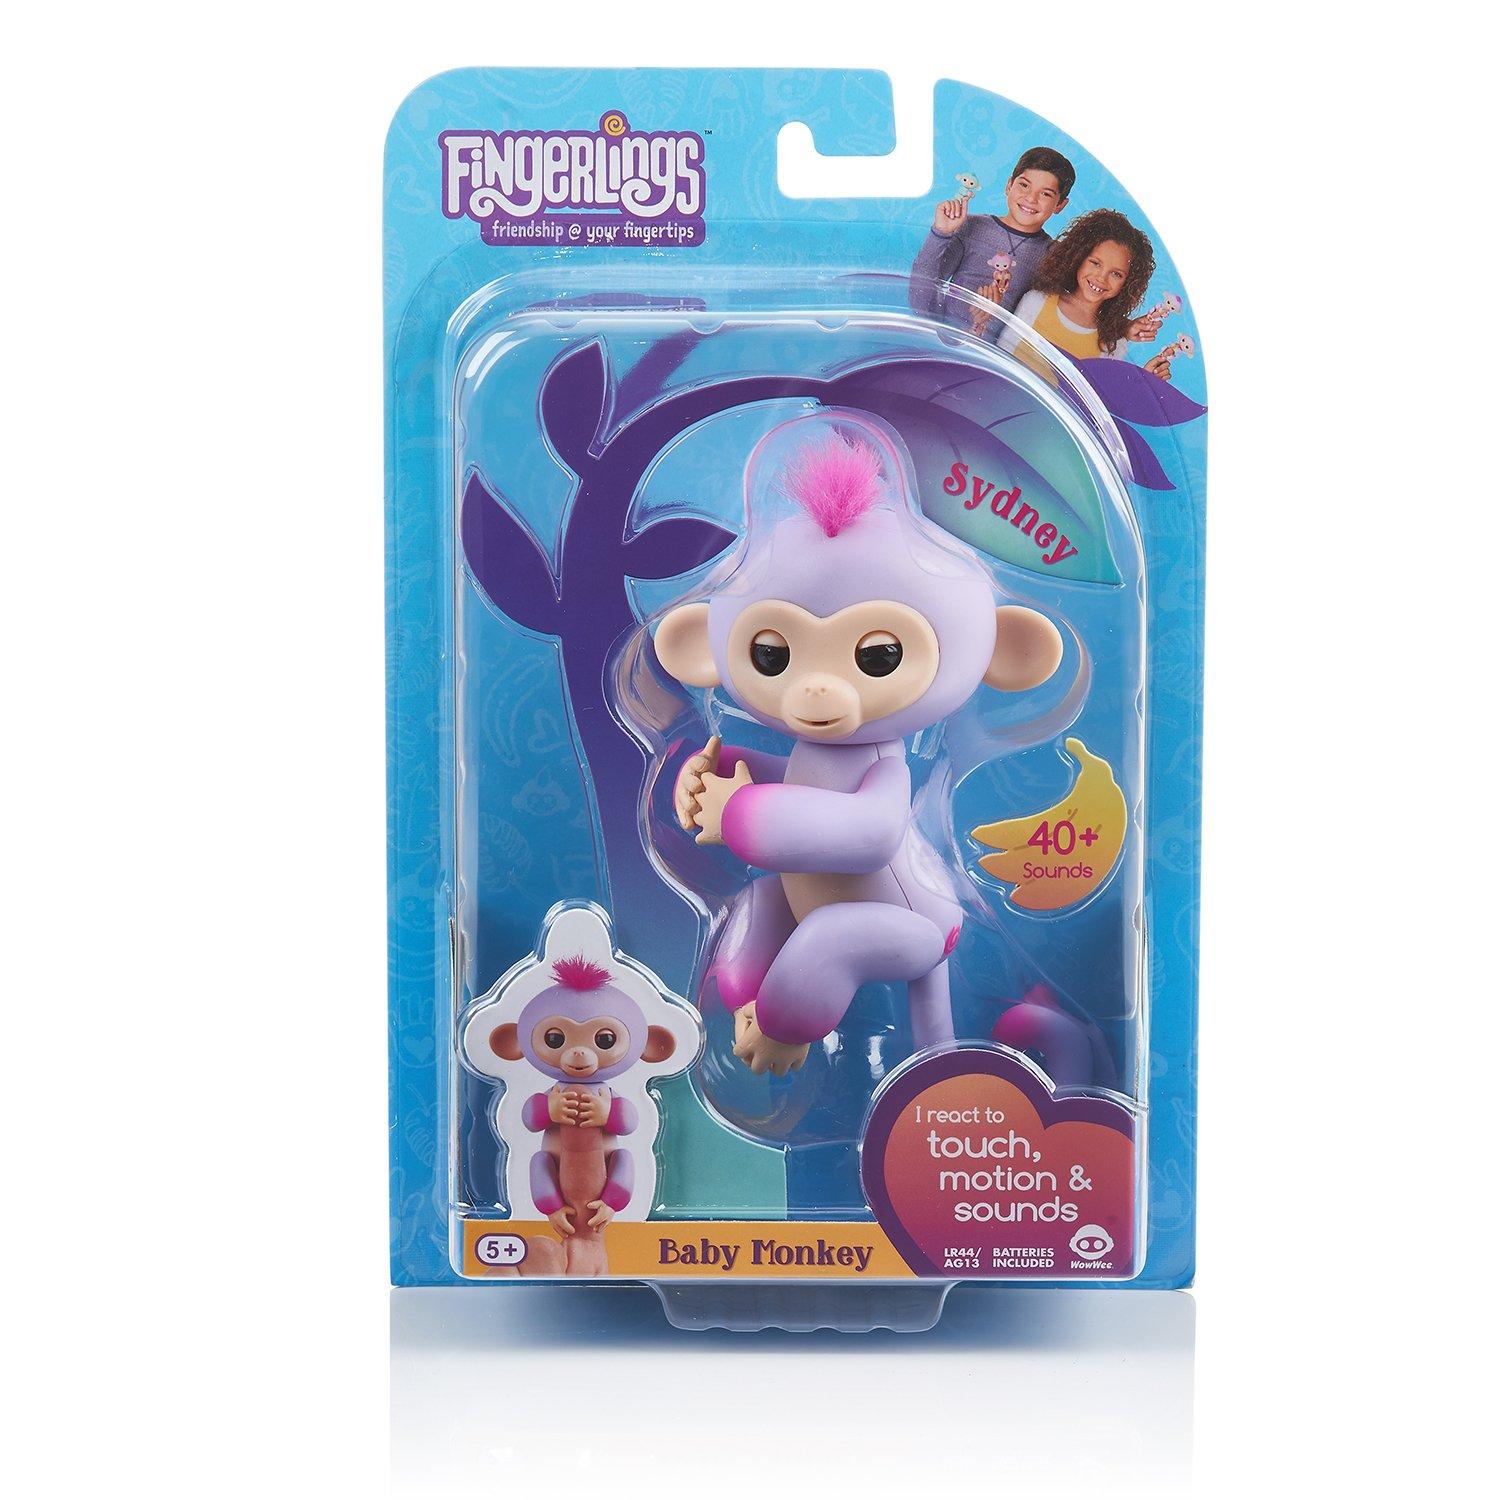 8. Fingerlings - Interactive Baby Monkey - Sydney (Purple with Pink Hair) - wide 6